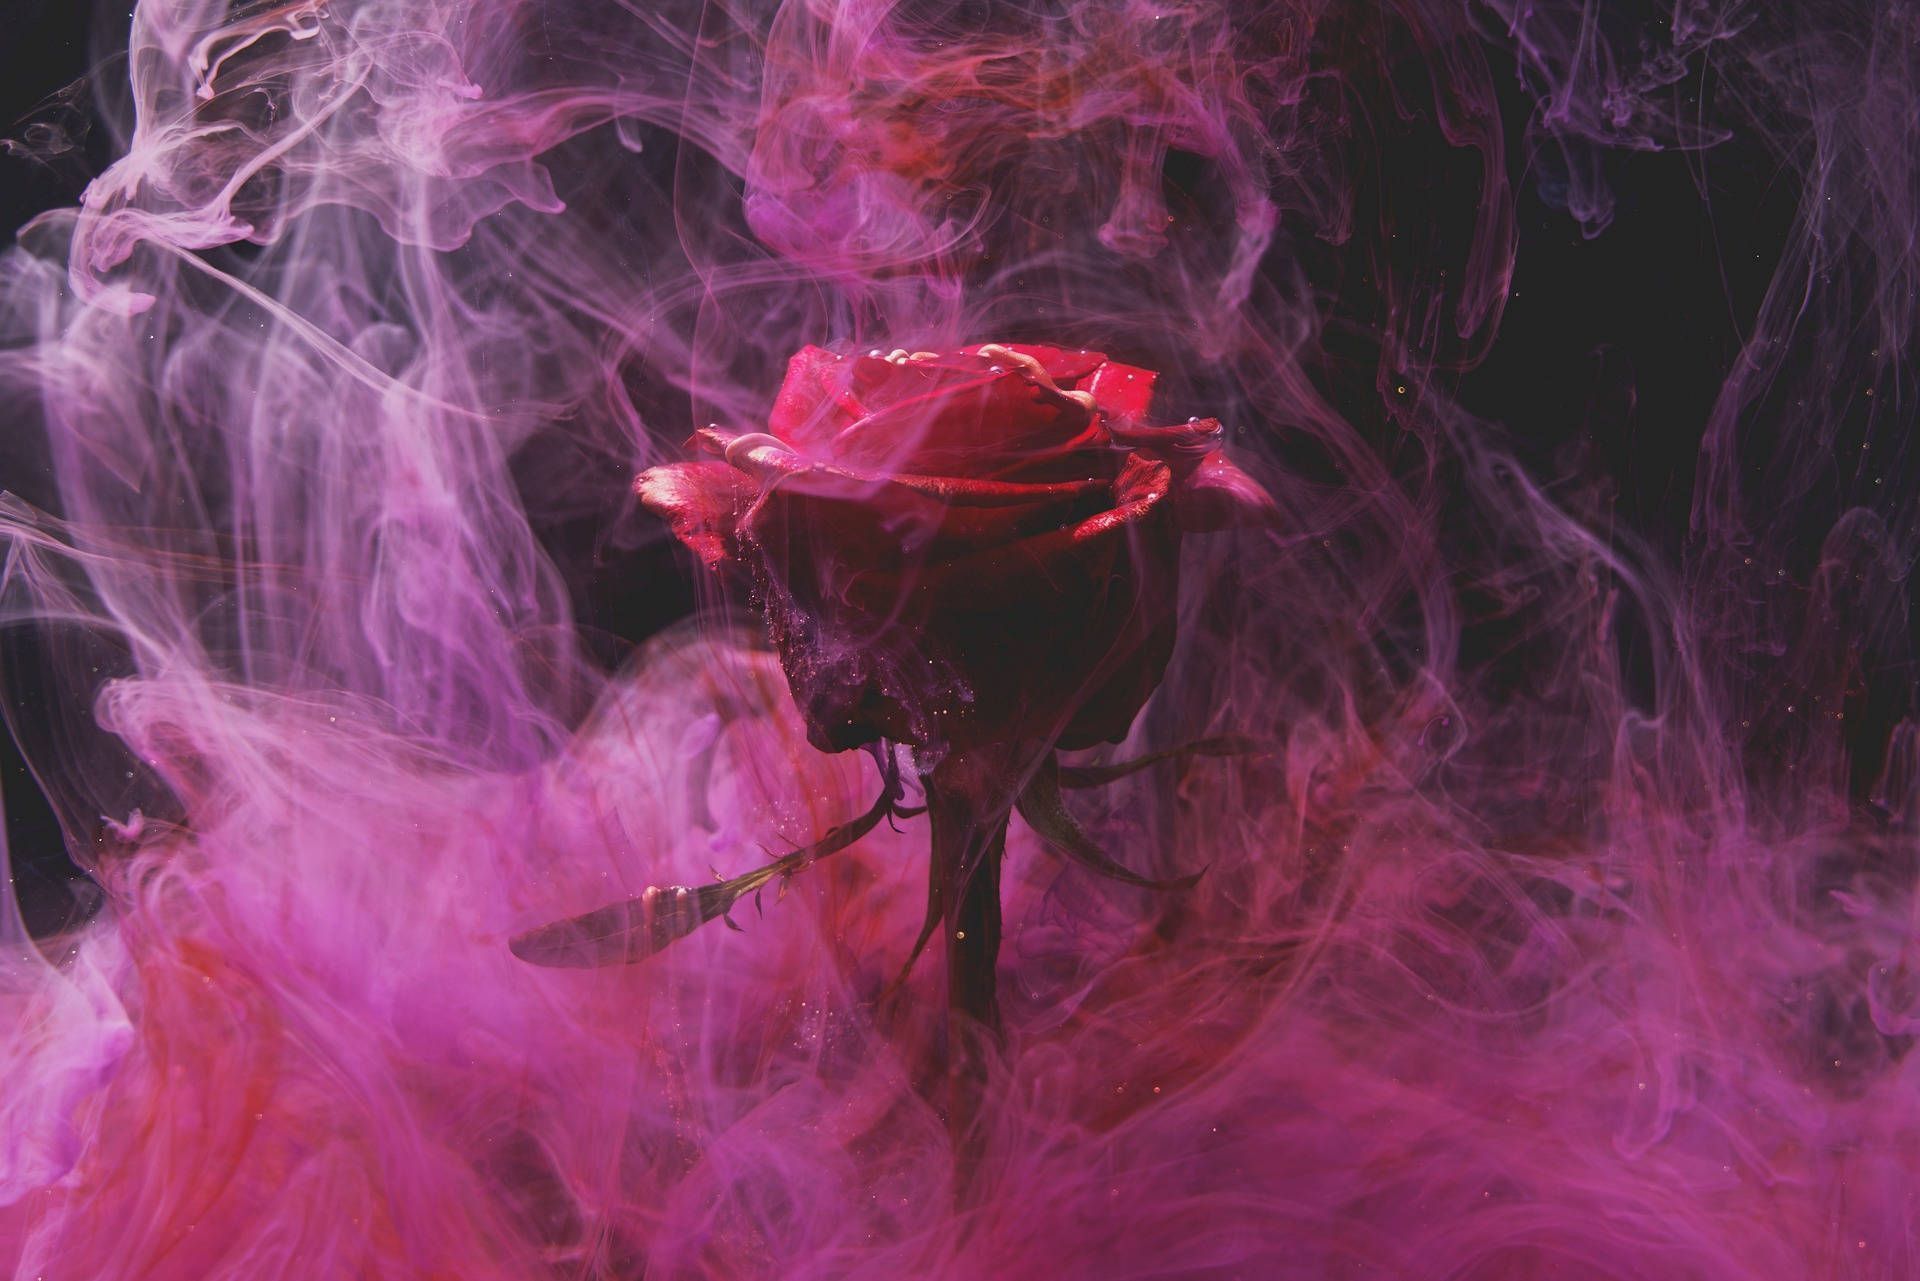 A rose is in the middle of smoke - Smoke